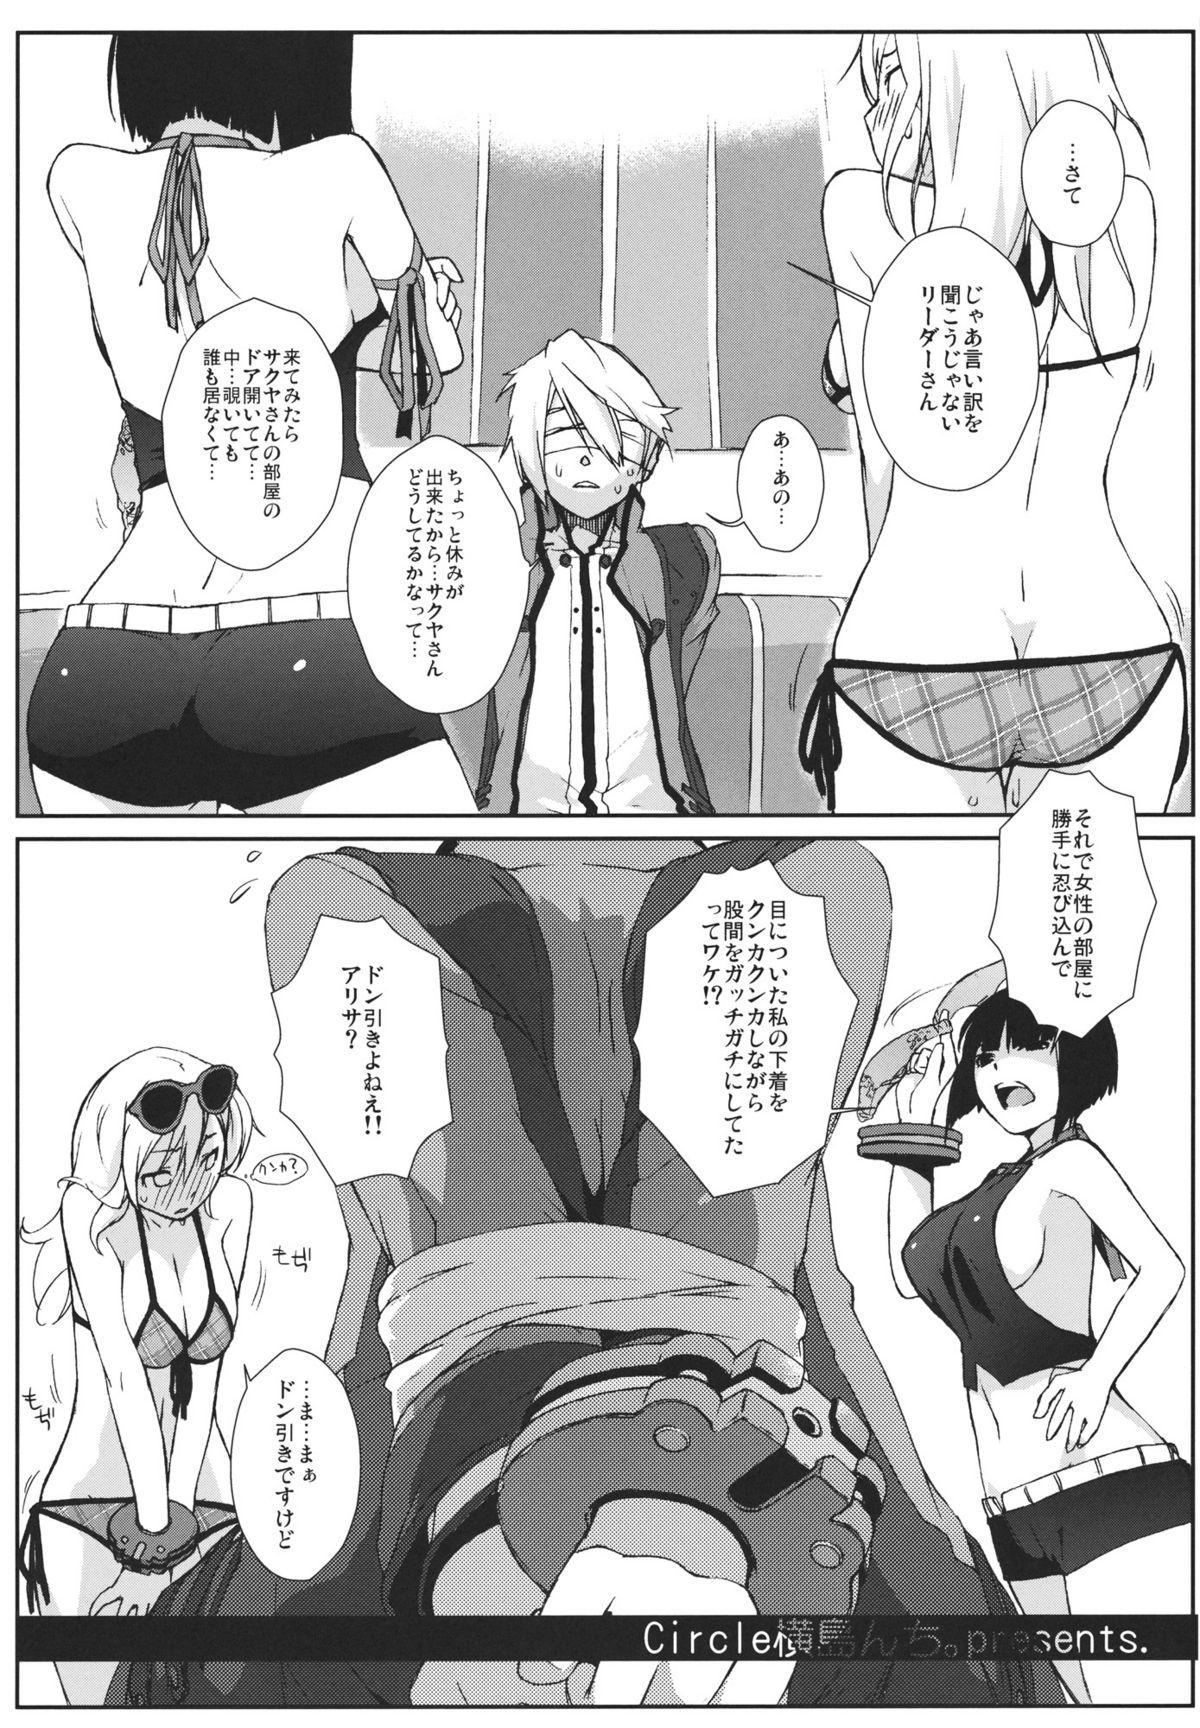 Periscope PLAYTHING 2.0 - God eater Moreno - Page 4